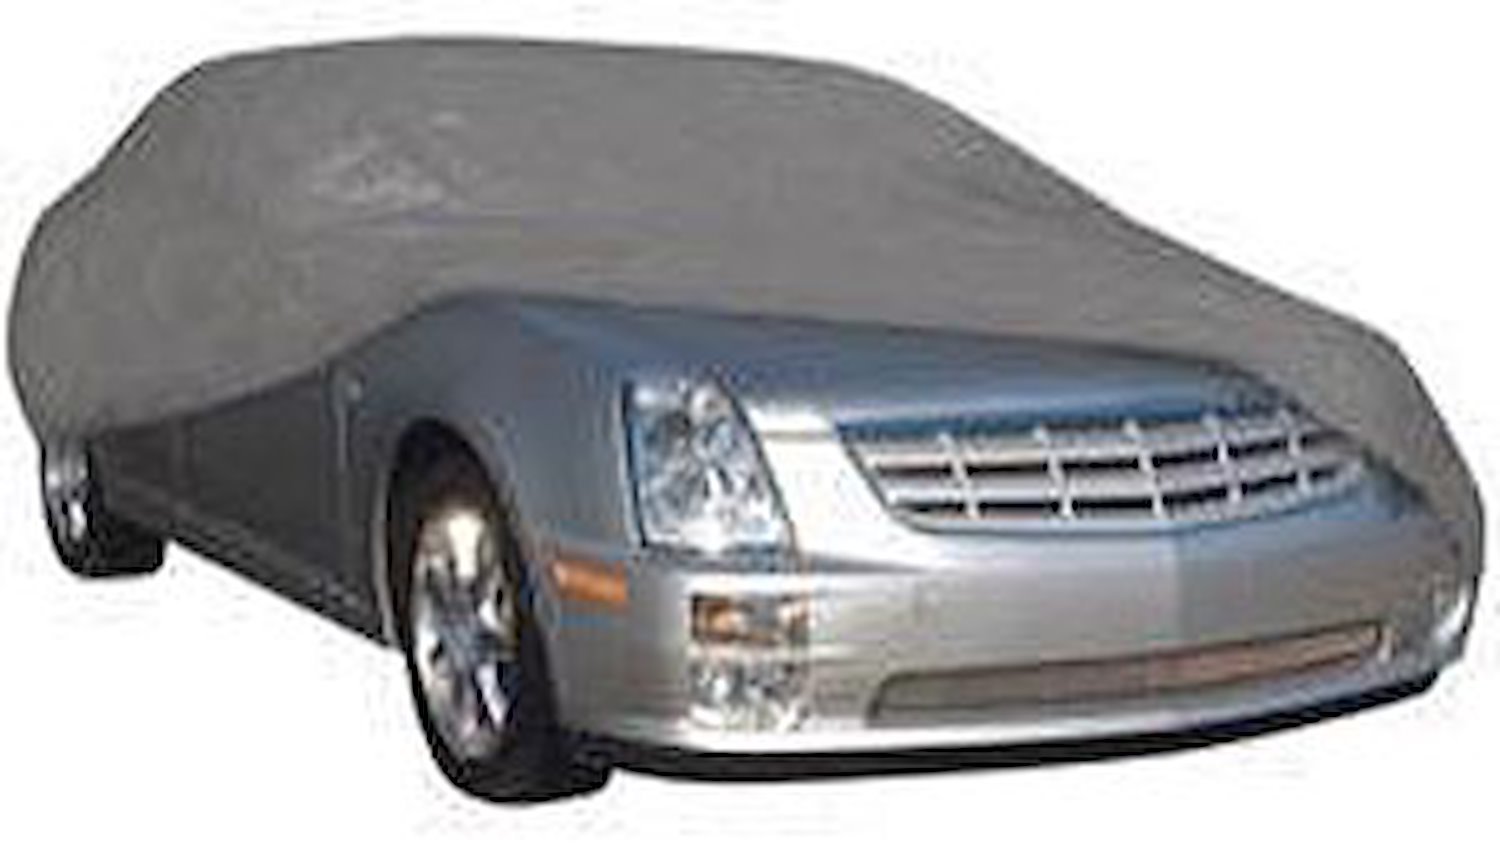 Rain Barrier Car Cover Fits Cars Up To 13" 1" in Length